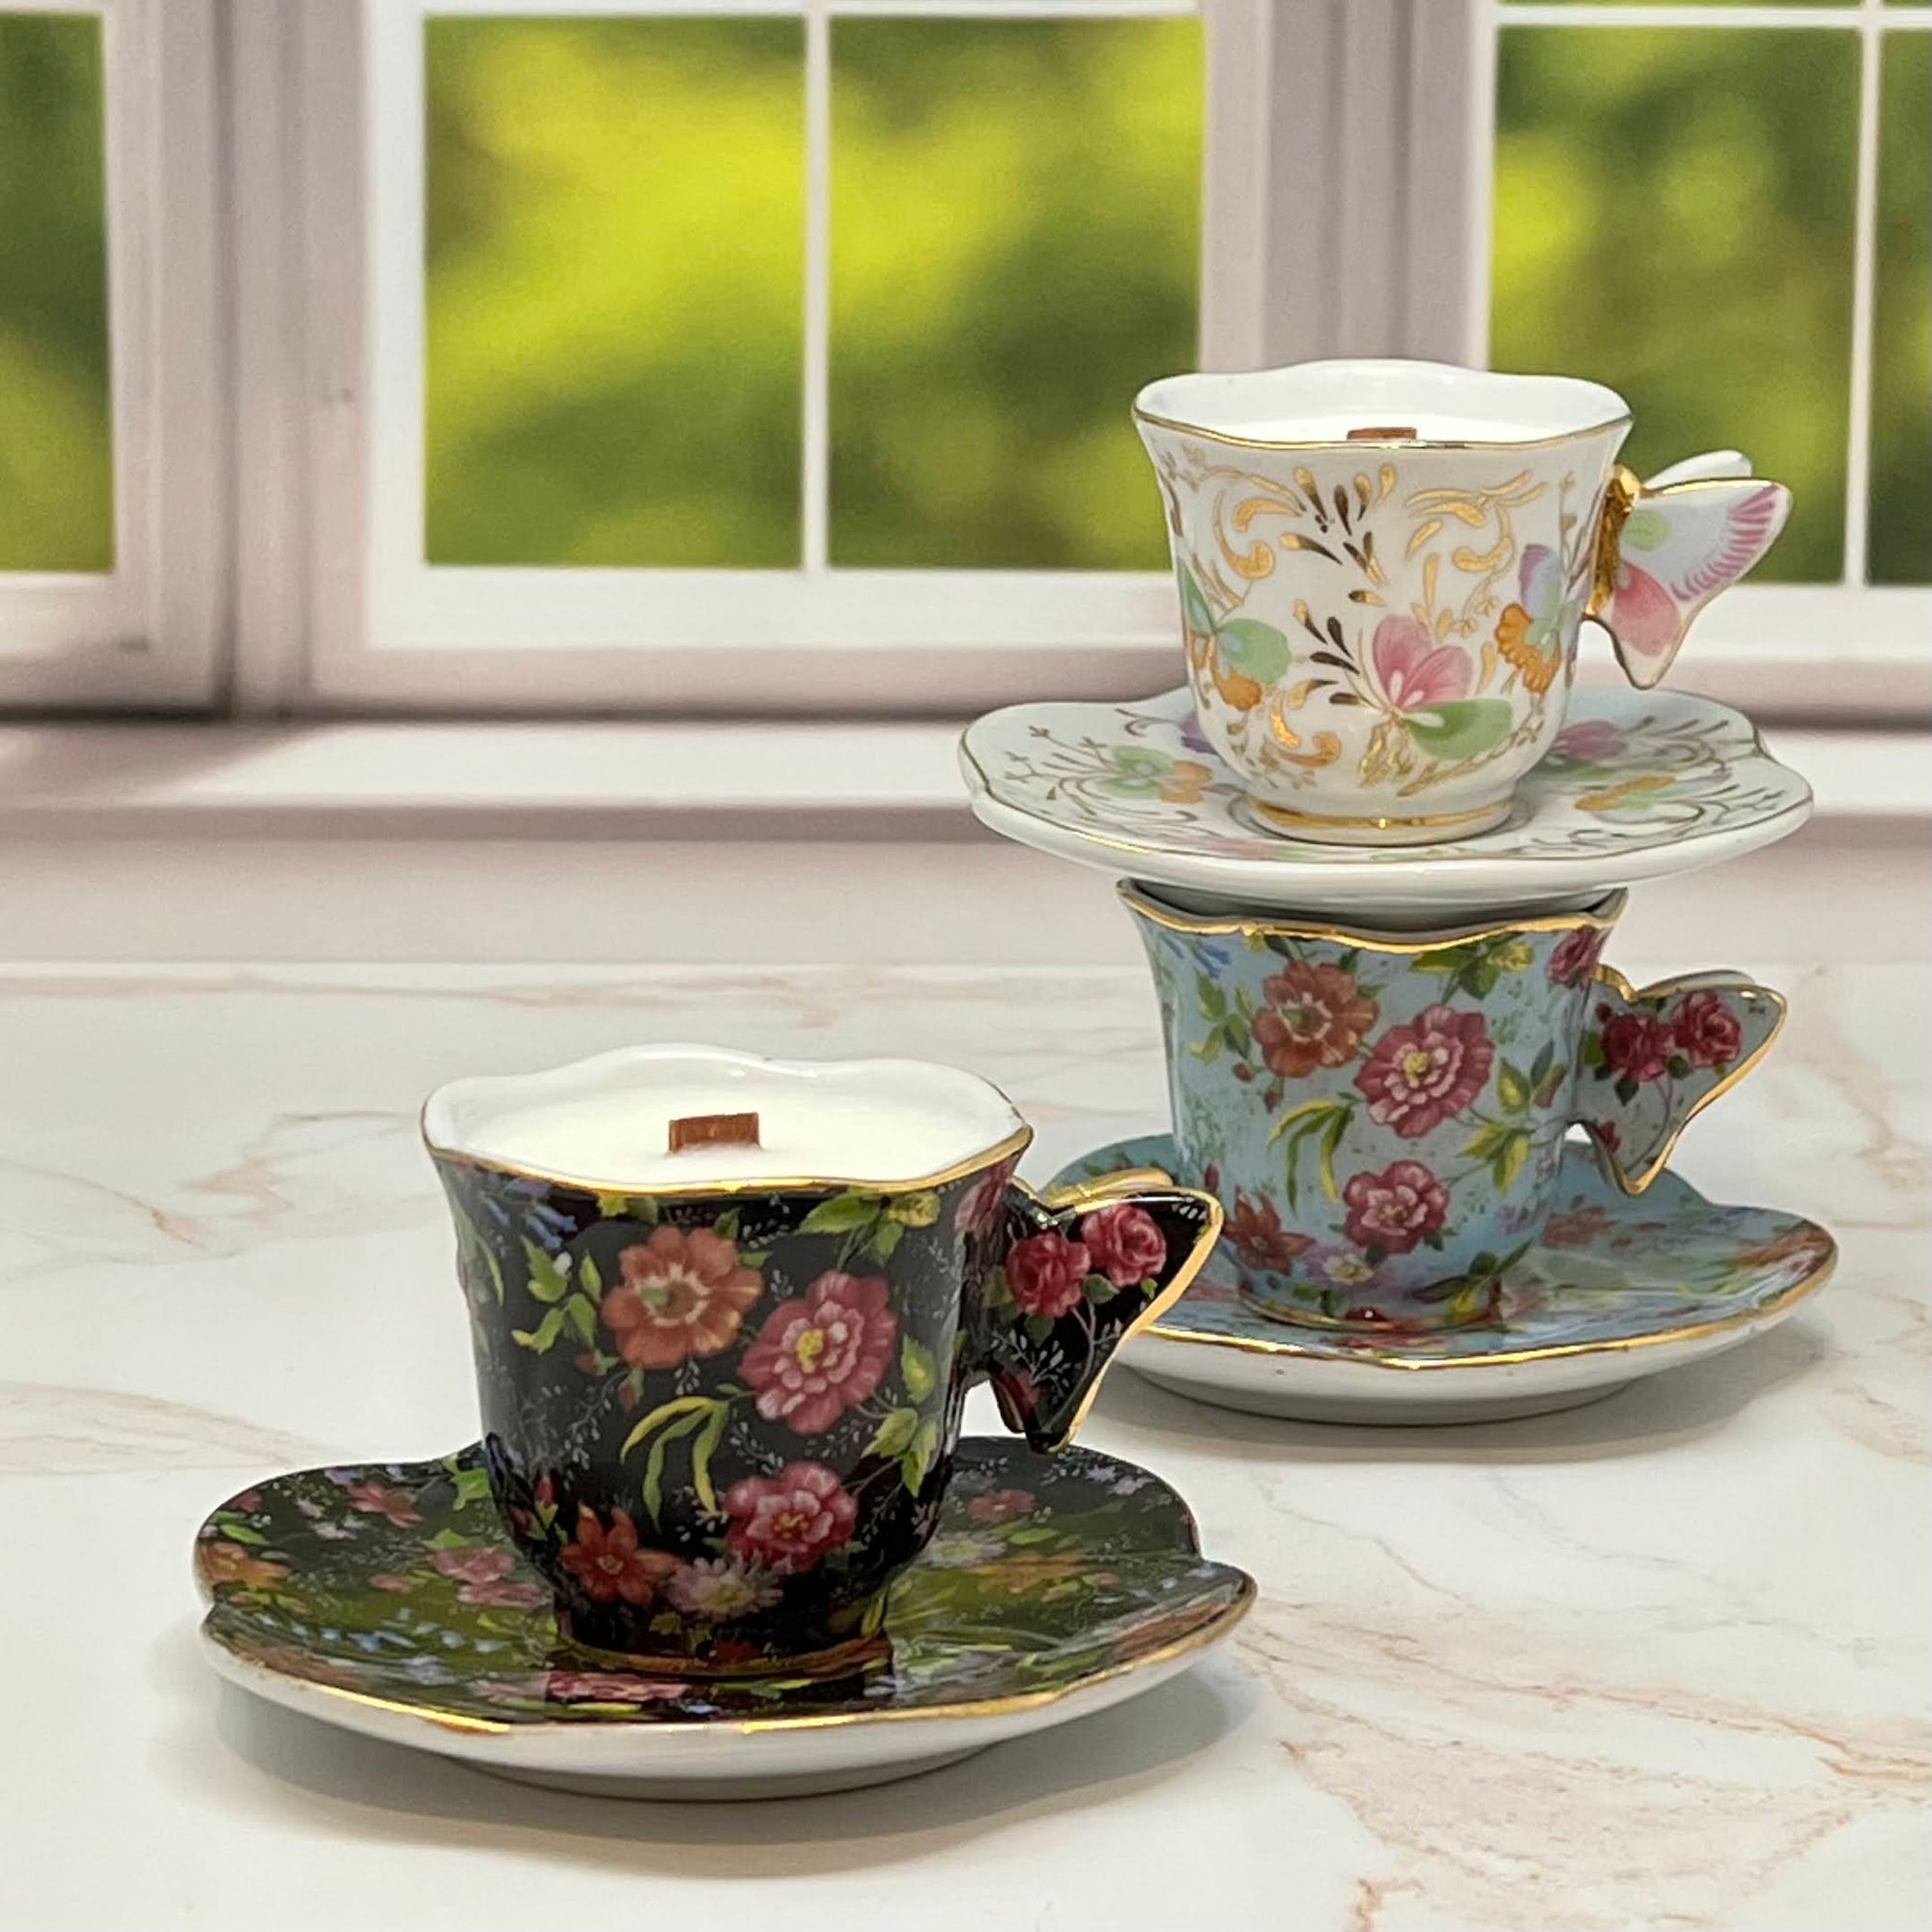 petite scented teacup candle gifts under $100